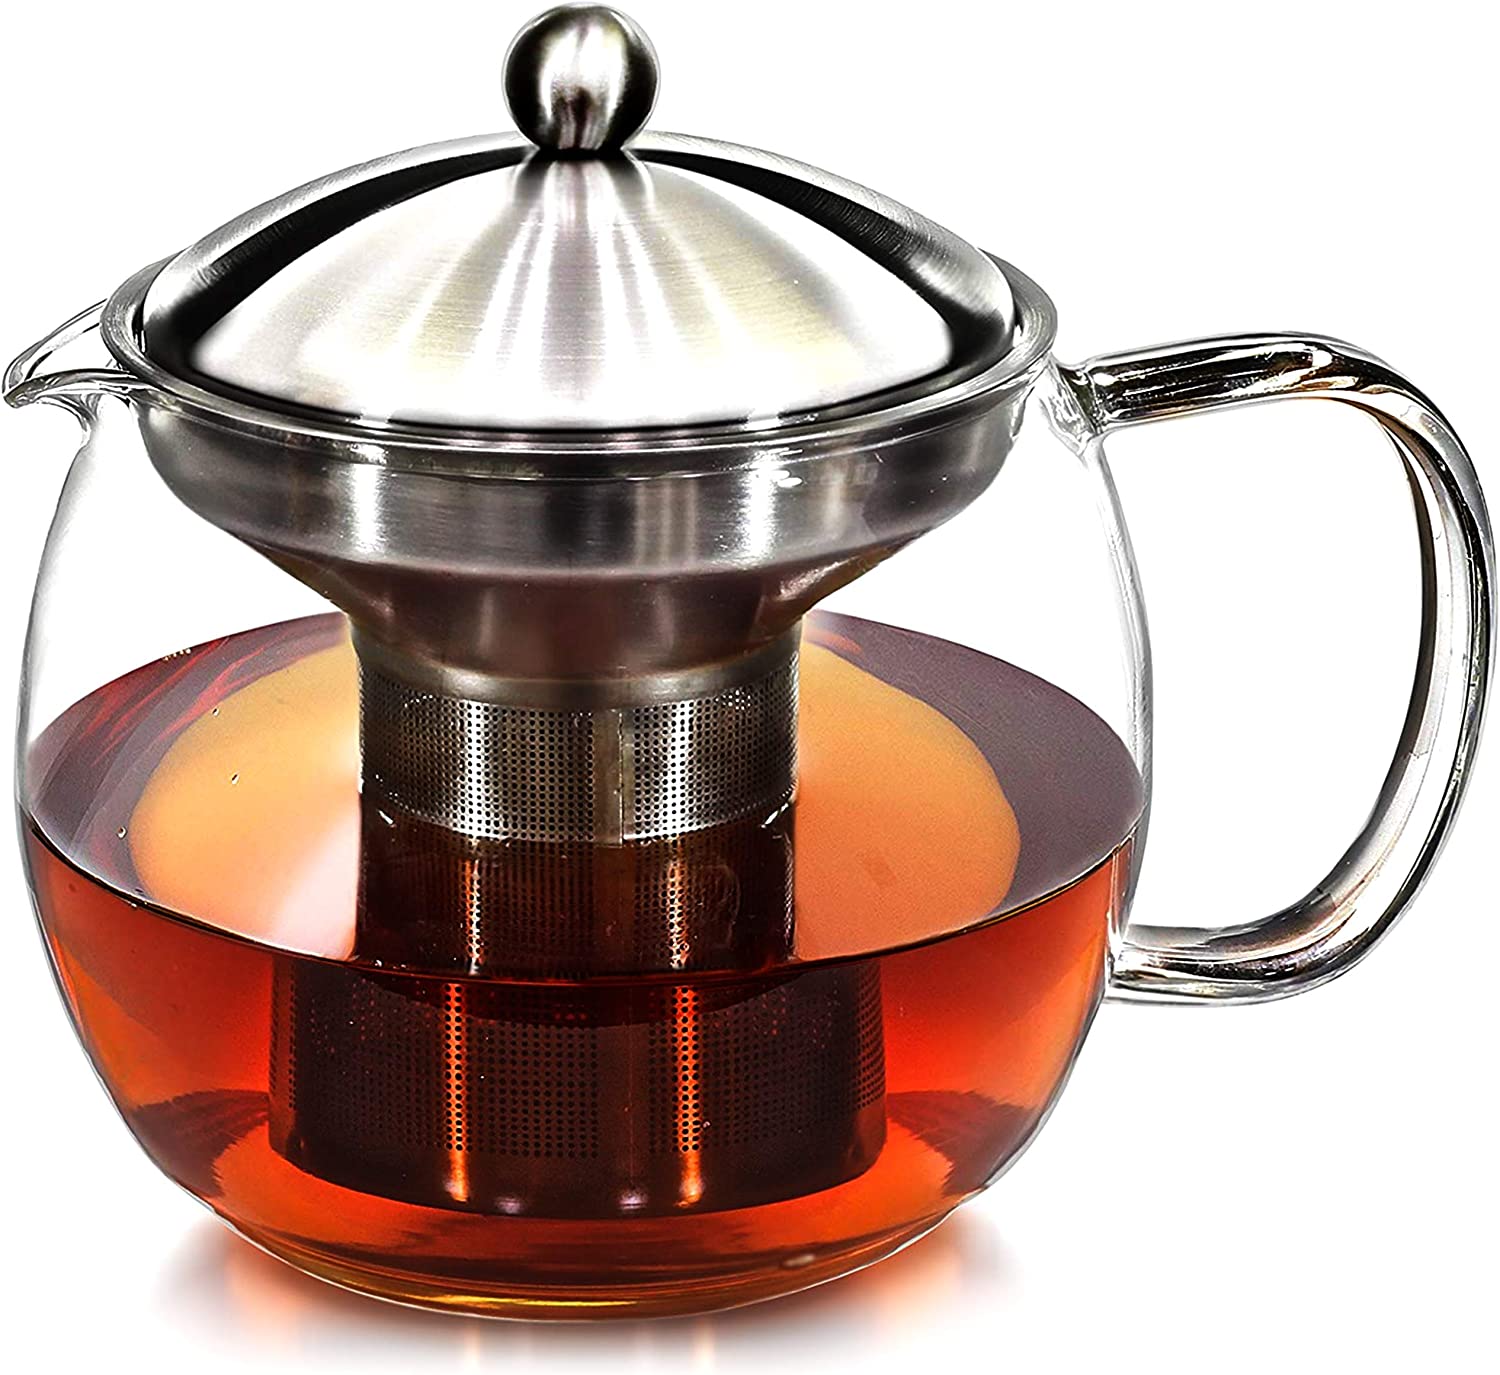 Willow & Everett Teapot Kettle with Warmer – Tea Pot and Tea Strainer/Tea Infuser for 3 – 4 Cups